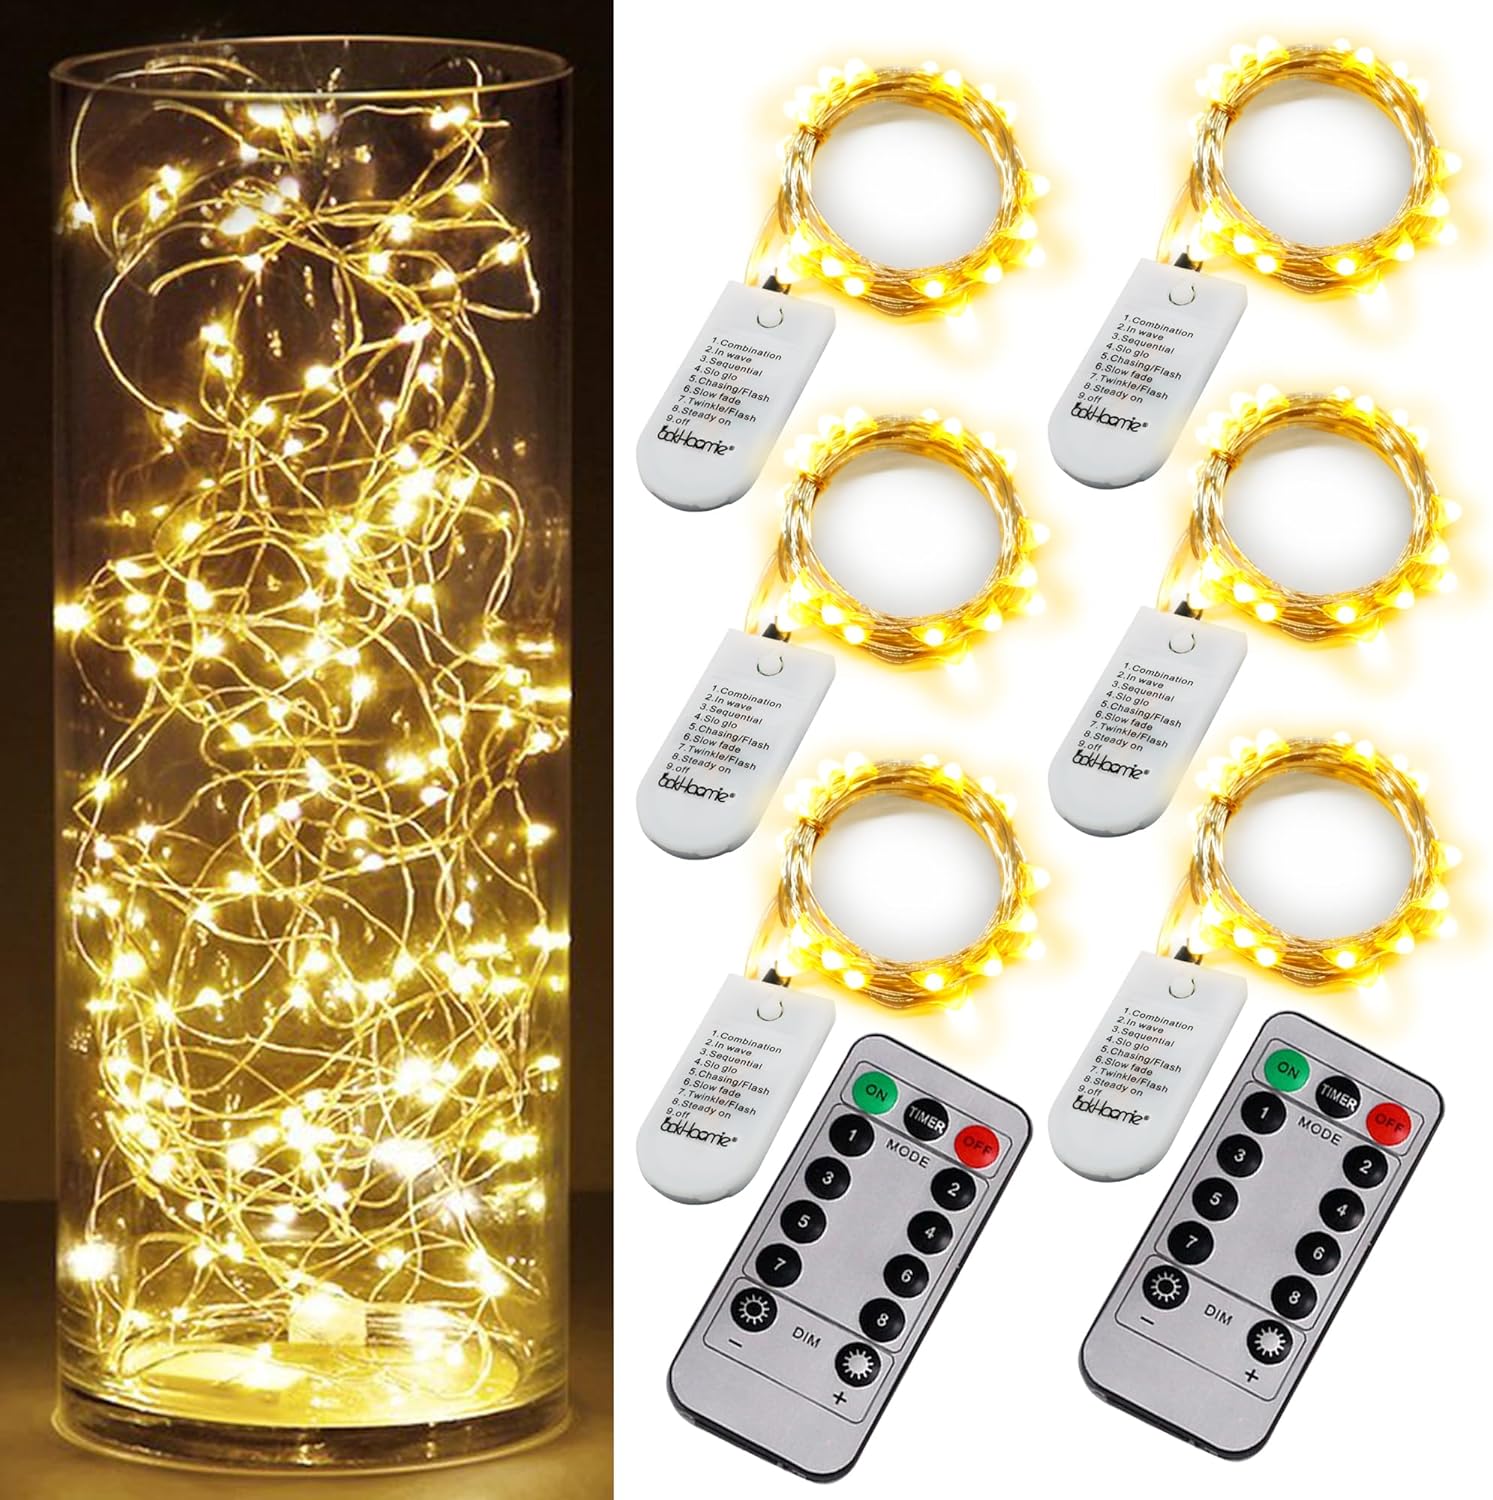 OakHaomie 6PCS Fairy String Warm White Changing Twinkle Lights with 2pcs Remote,6.5ft 20 LEDs Silver Wire,CR2032 Battery Powered,Indoor Decor Bedroom,Wedding,Patio,Christmas,Outdoor Garden,Stroller